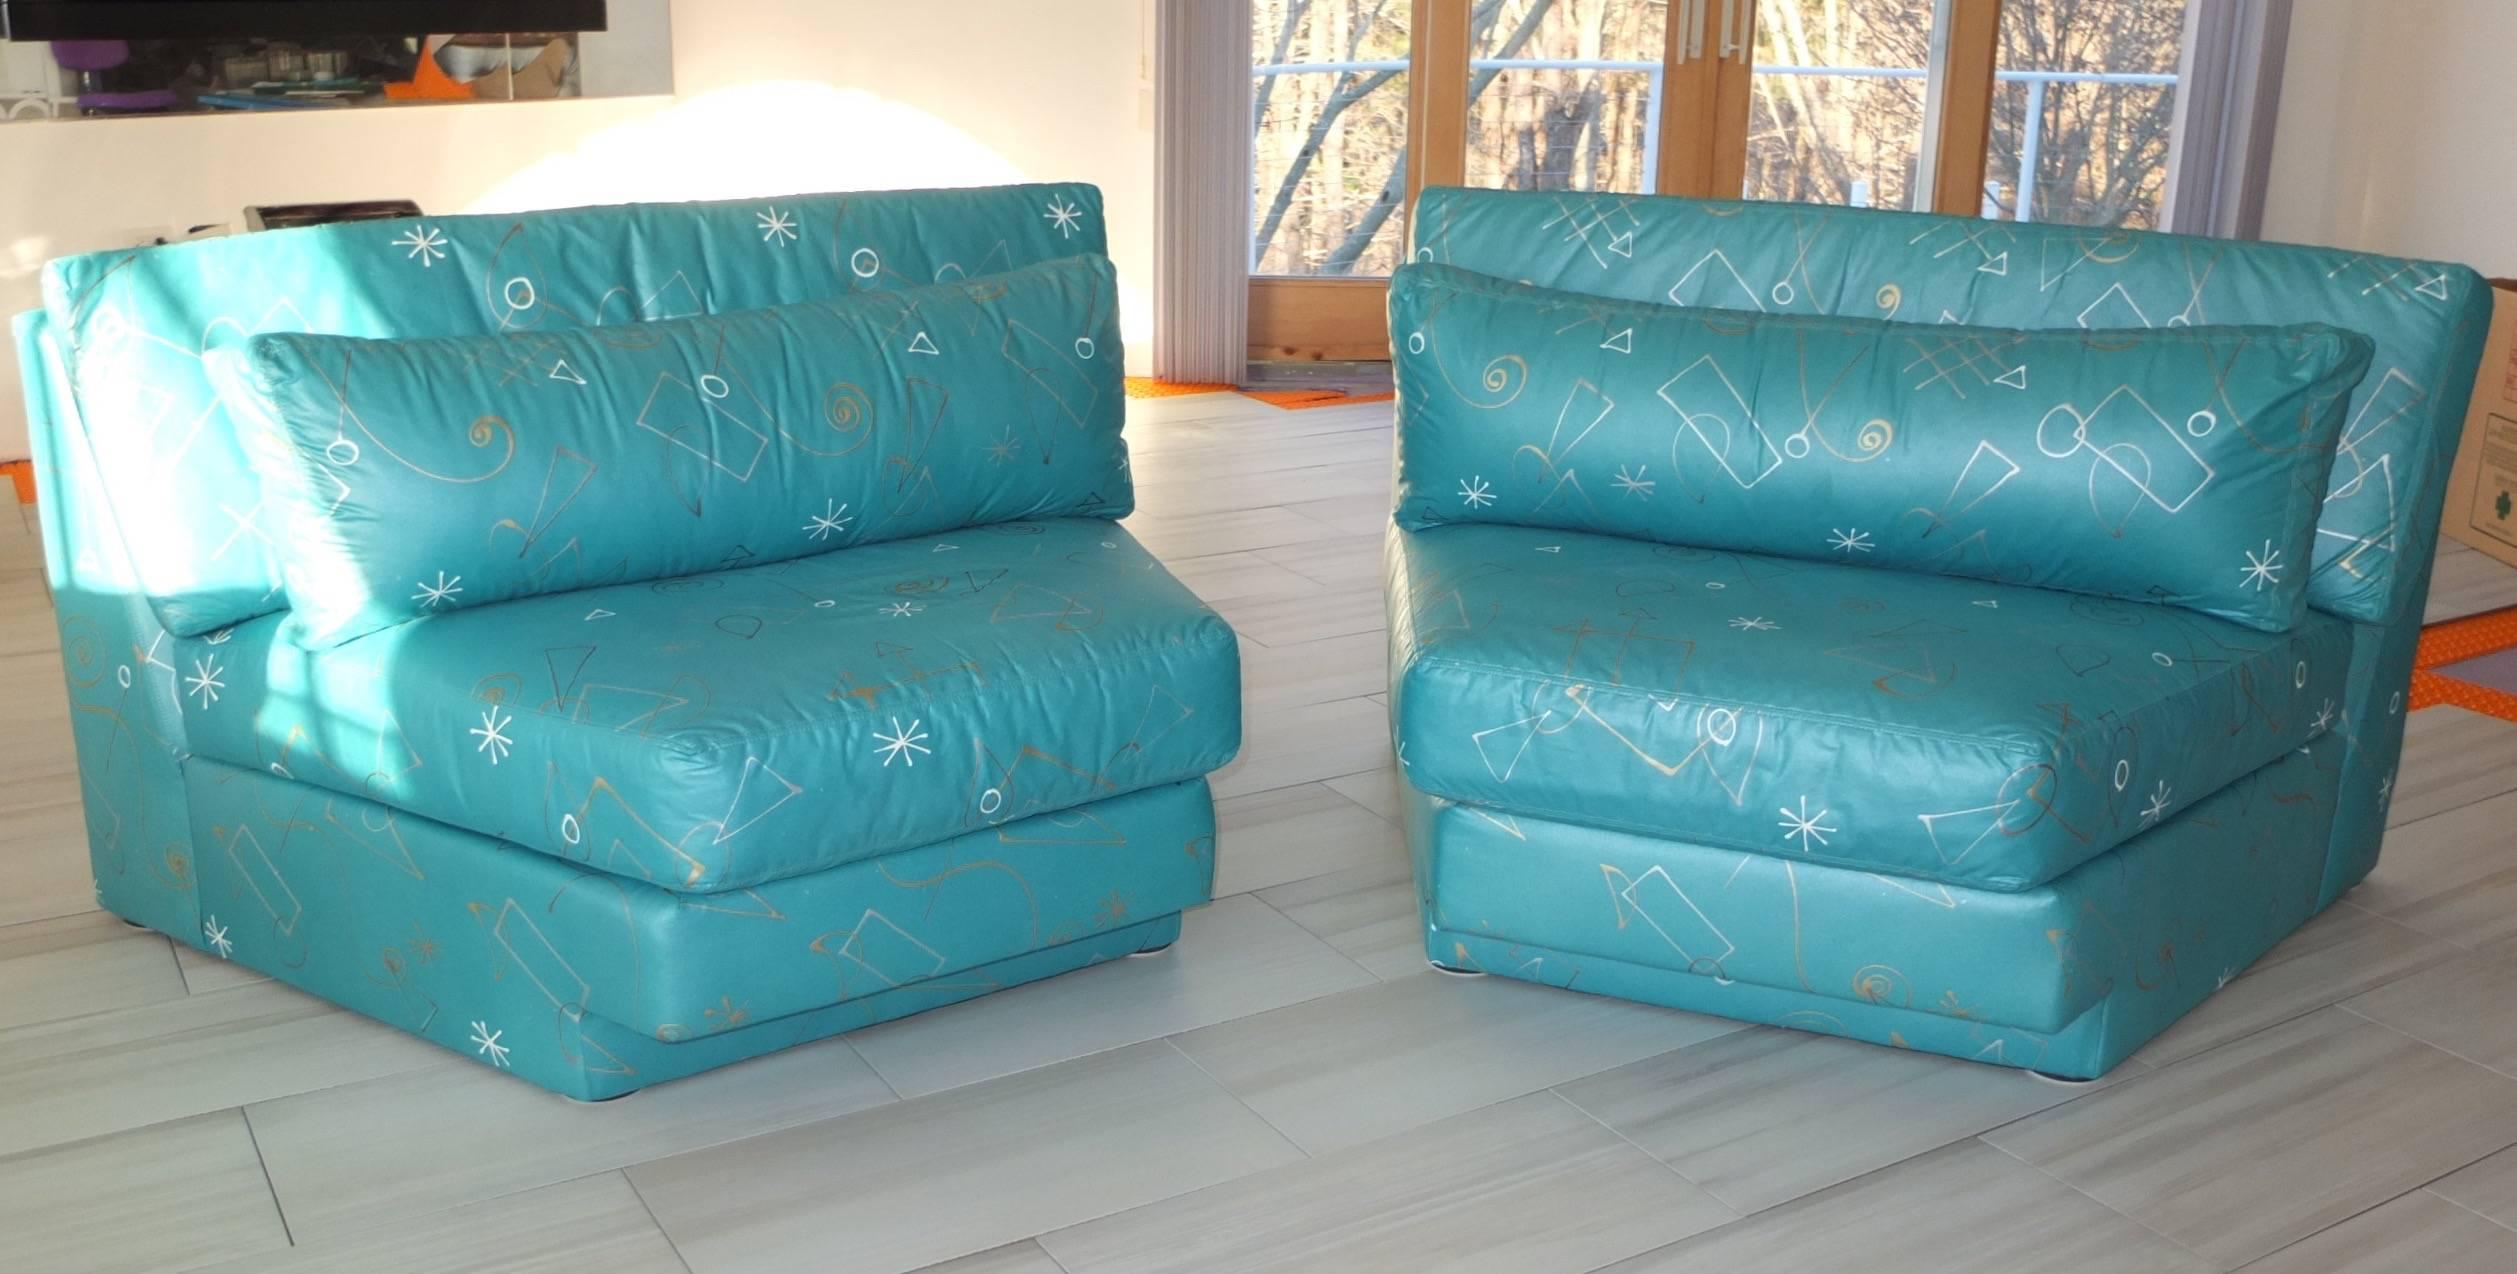 New old stock never been used pair of wedge shaped seating sections in the style of Milo Baughman and Vladimir Kagan. Made by Classic Gallery, Highpoint, circa 1995. Totally upholstered in teal chintz with hand-painted graphic designs in silver,